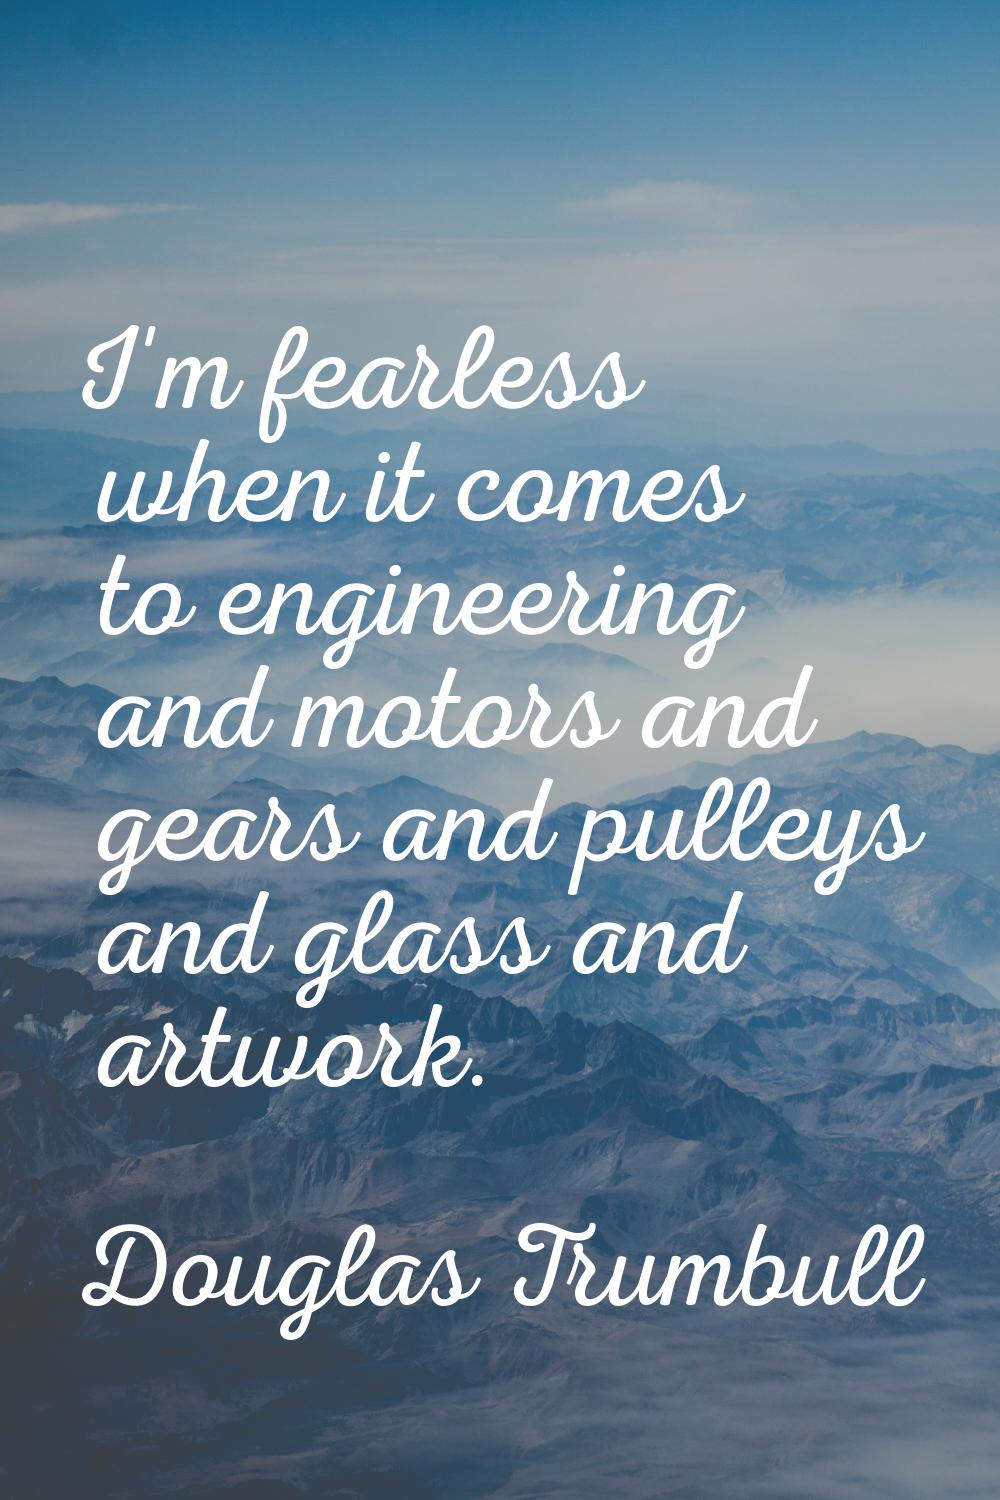 I'm fearless when it comes to engineering and motors and gears and pulleys and glass and artwork.